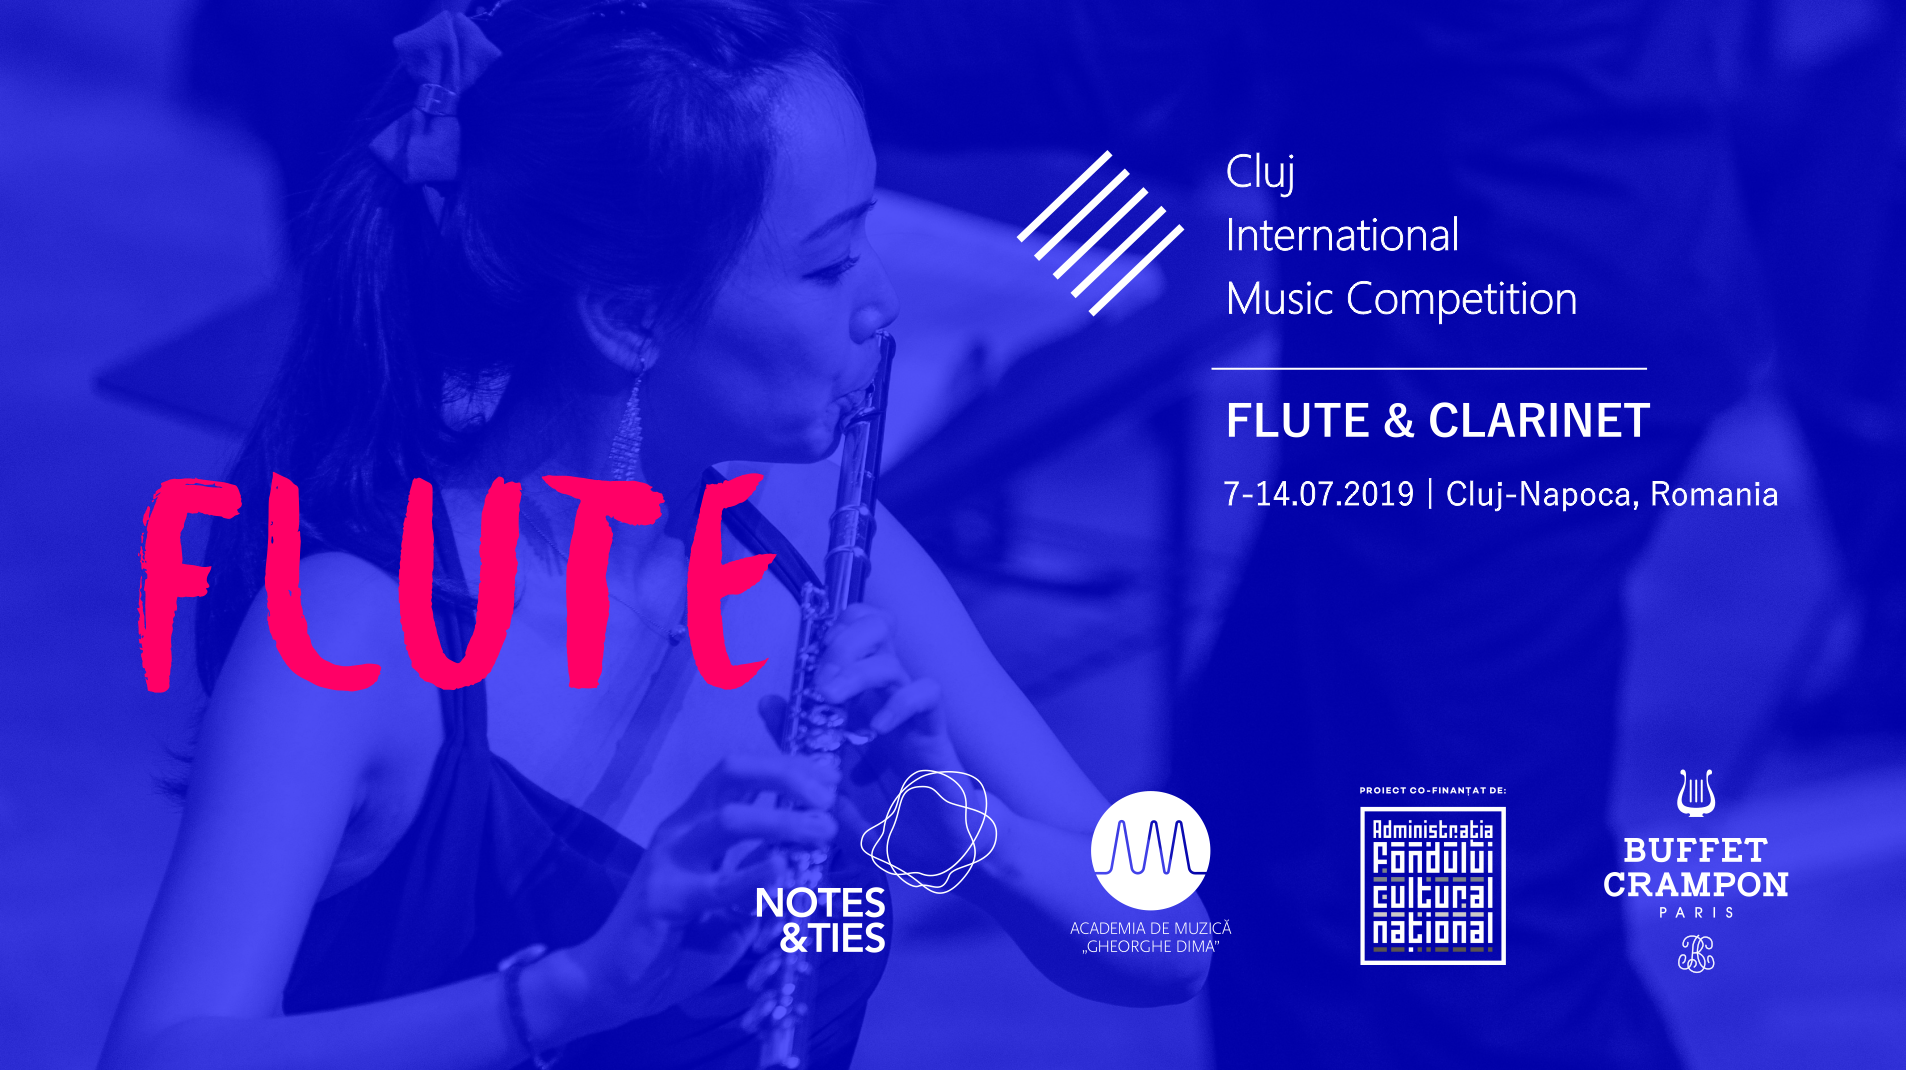 Refinement coin violent Final Flute CLUJ INTERNATIONAL MUSIC COMPETITION 2019: Flute on Livestream